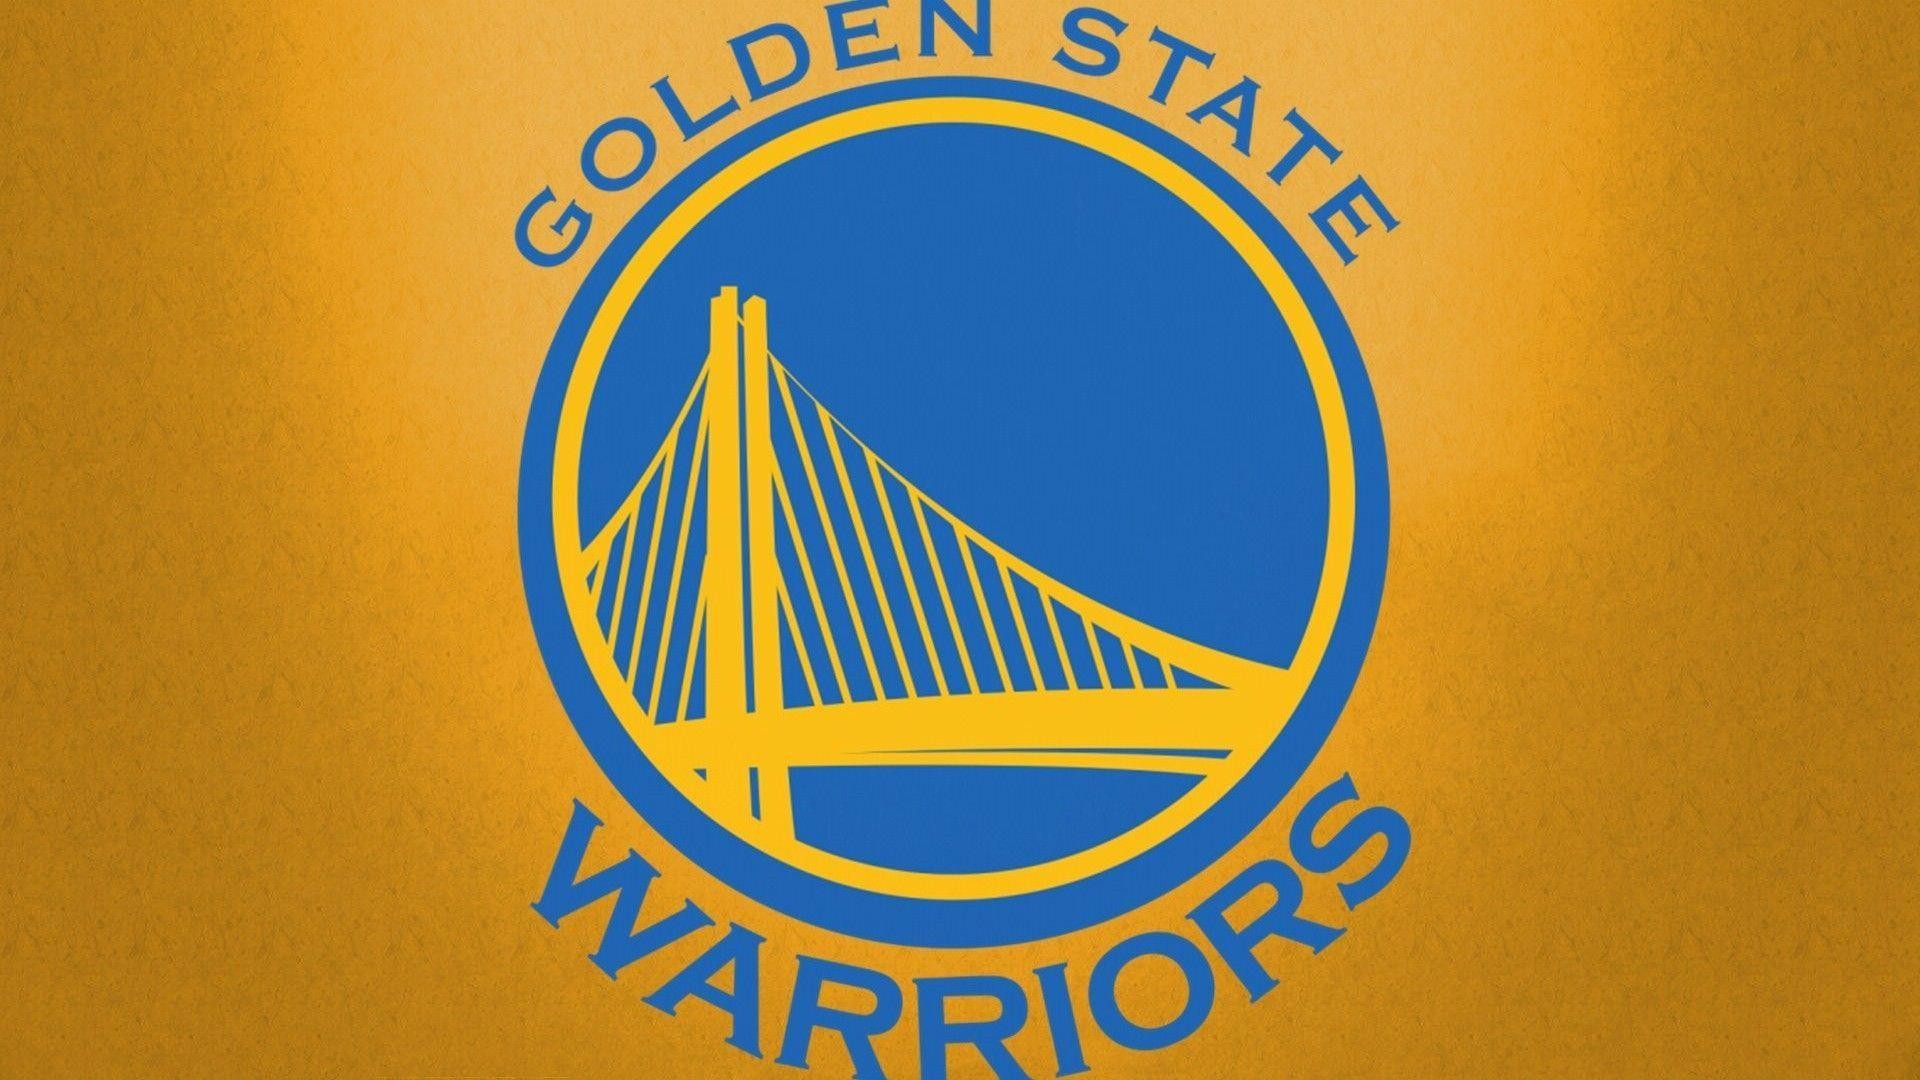 1920x1080 Pretty Golden State Warriors Wallpapers - Cardinal HD Wallpapers Site